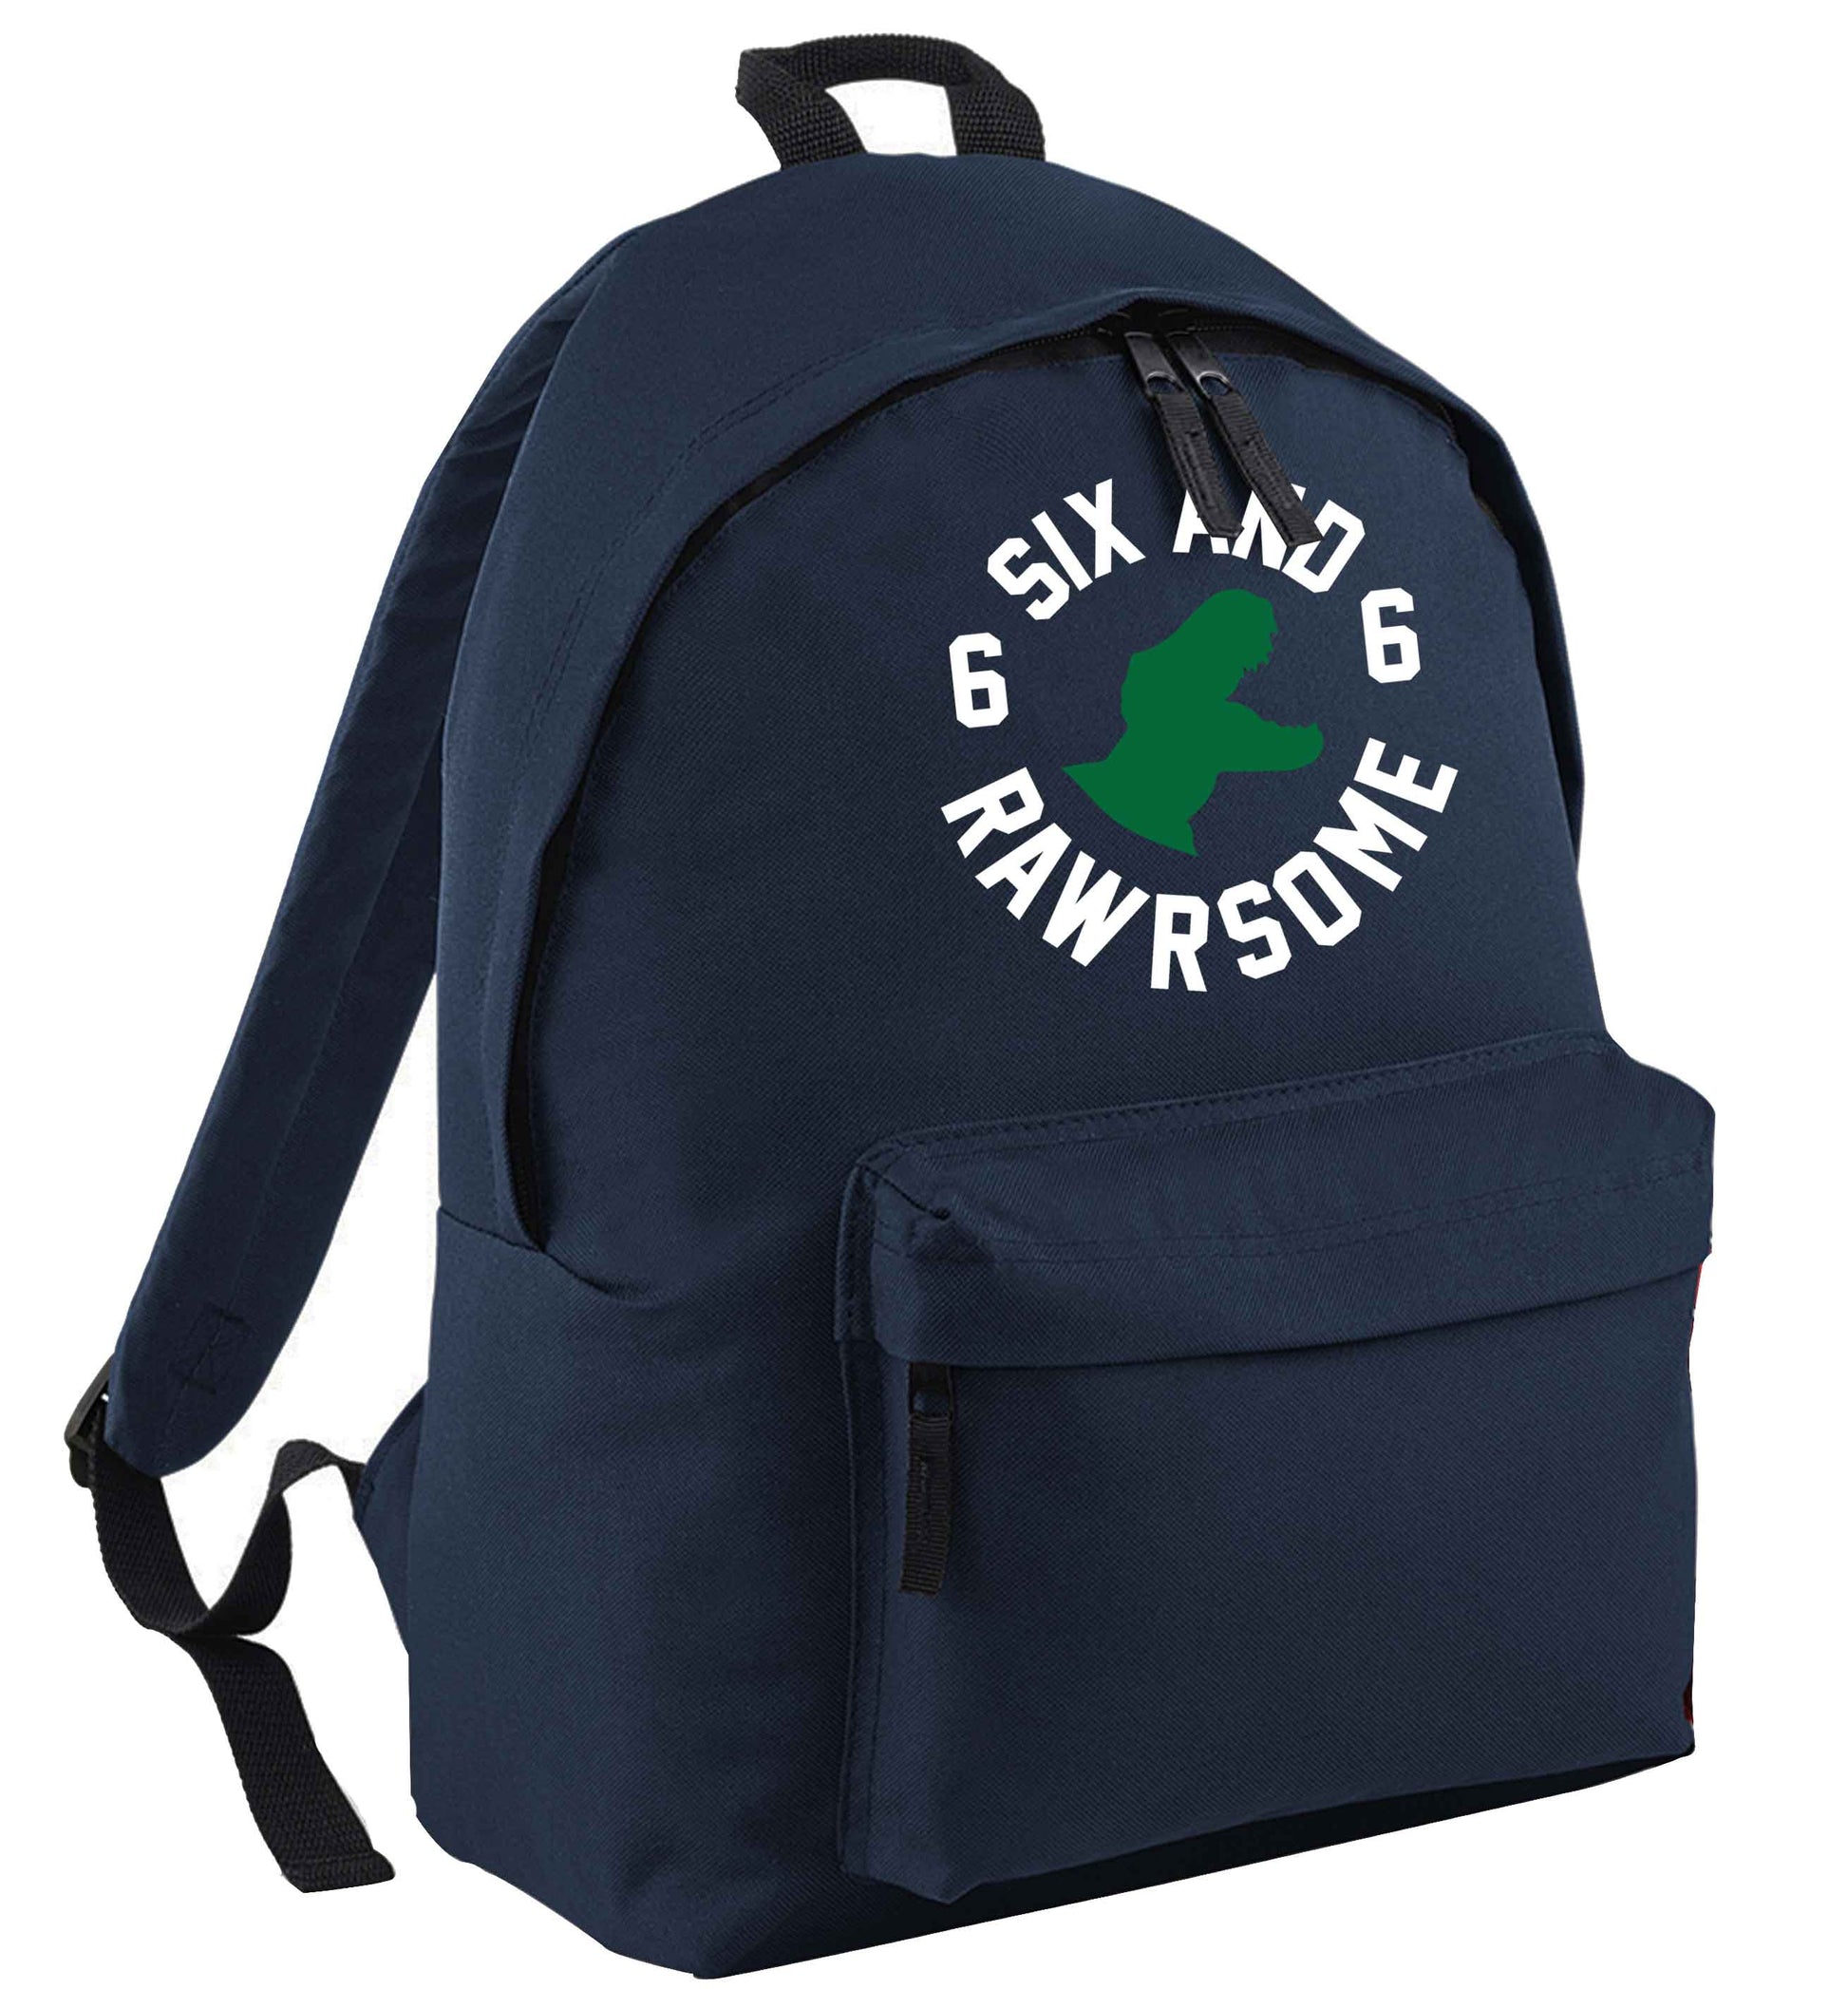 Six and rawrsome navy adults backpack